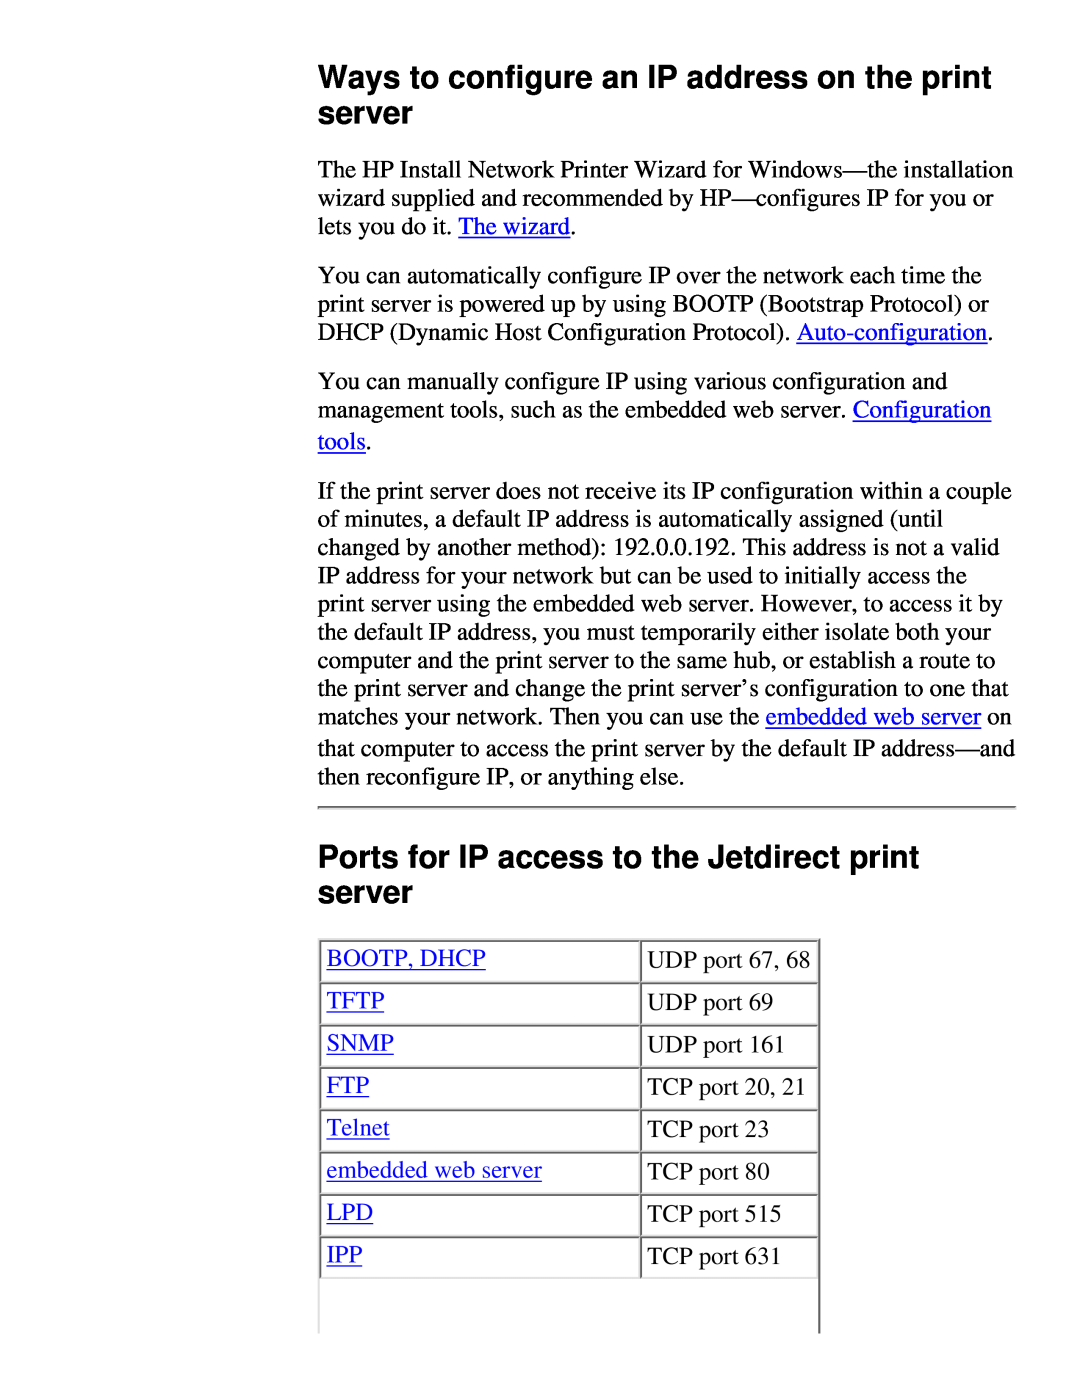 HP 175X Ways to configure an IP address on the print server, Ports for IP access to the Jetdirect print server, tools 